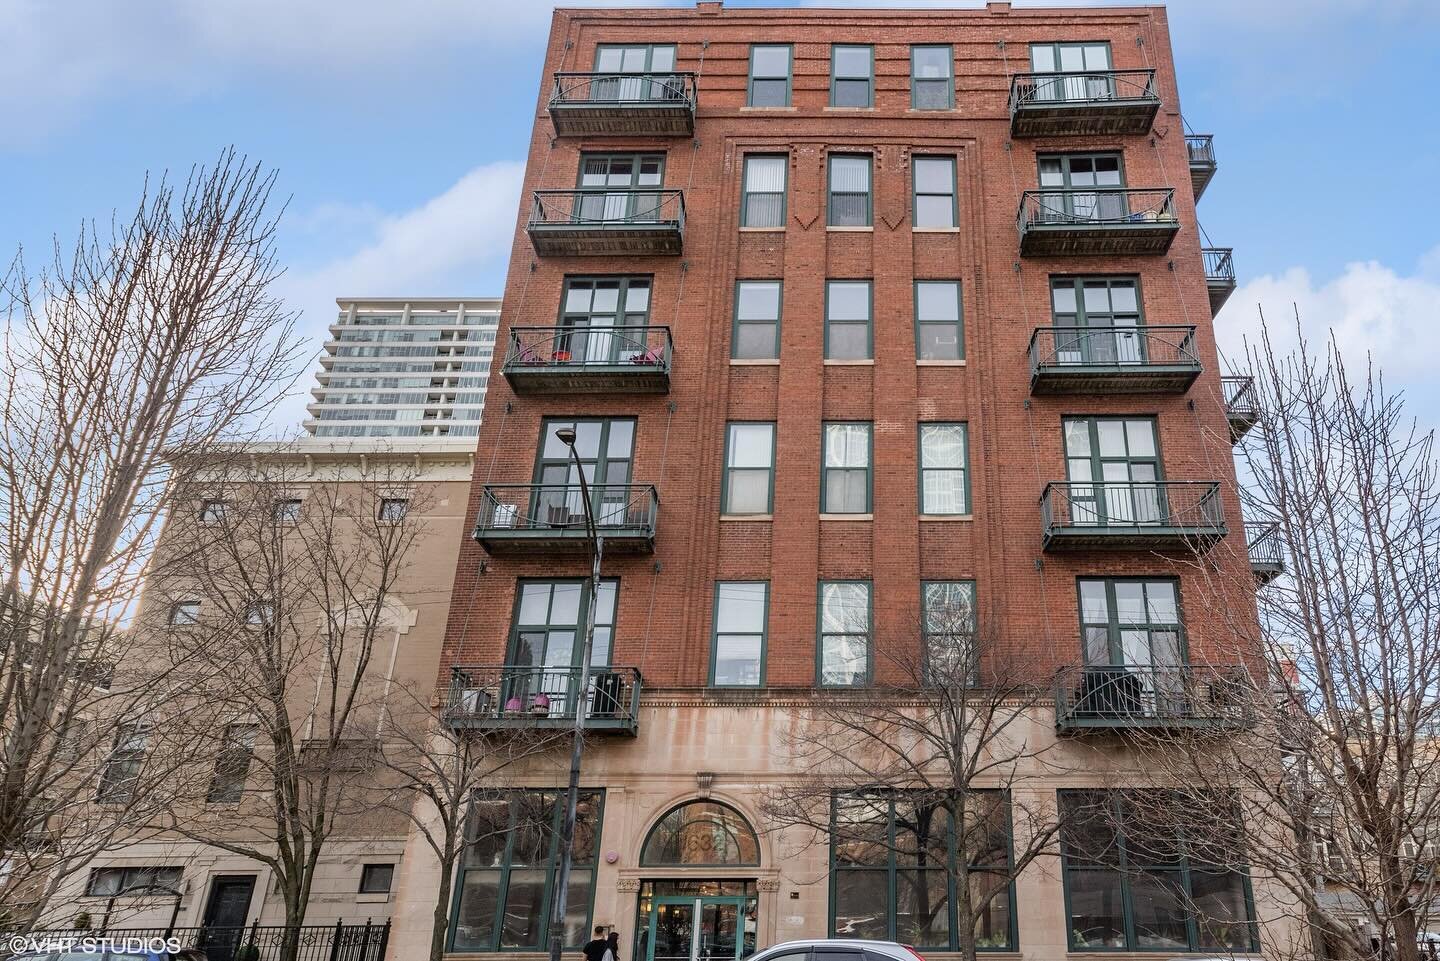 OPEN HOUSE

1632 S Indiana Ave #507

$349,000

1 bed + den / 2 bath

Come and join us Saturday 30th of March from 11 - 12:30 for a look around this fantastic South Loop condo!